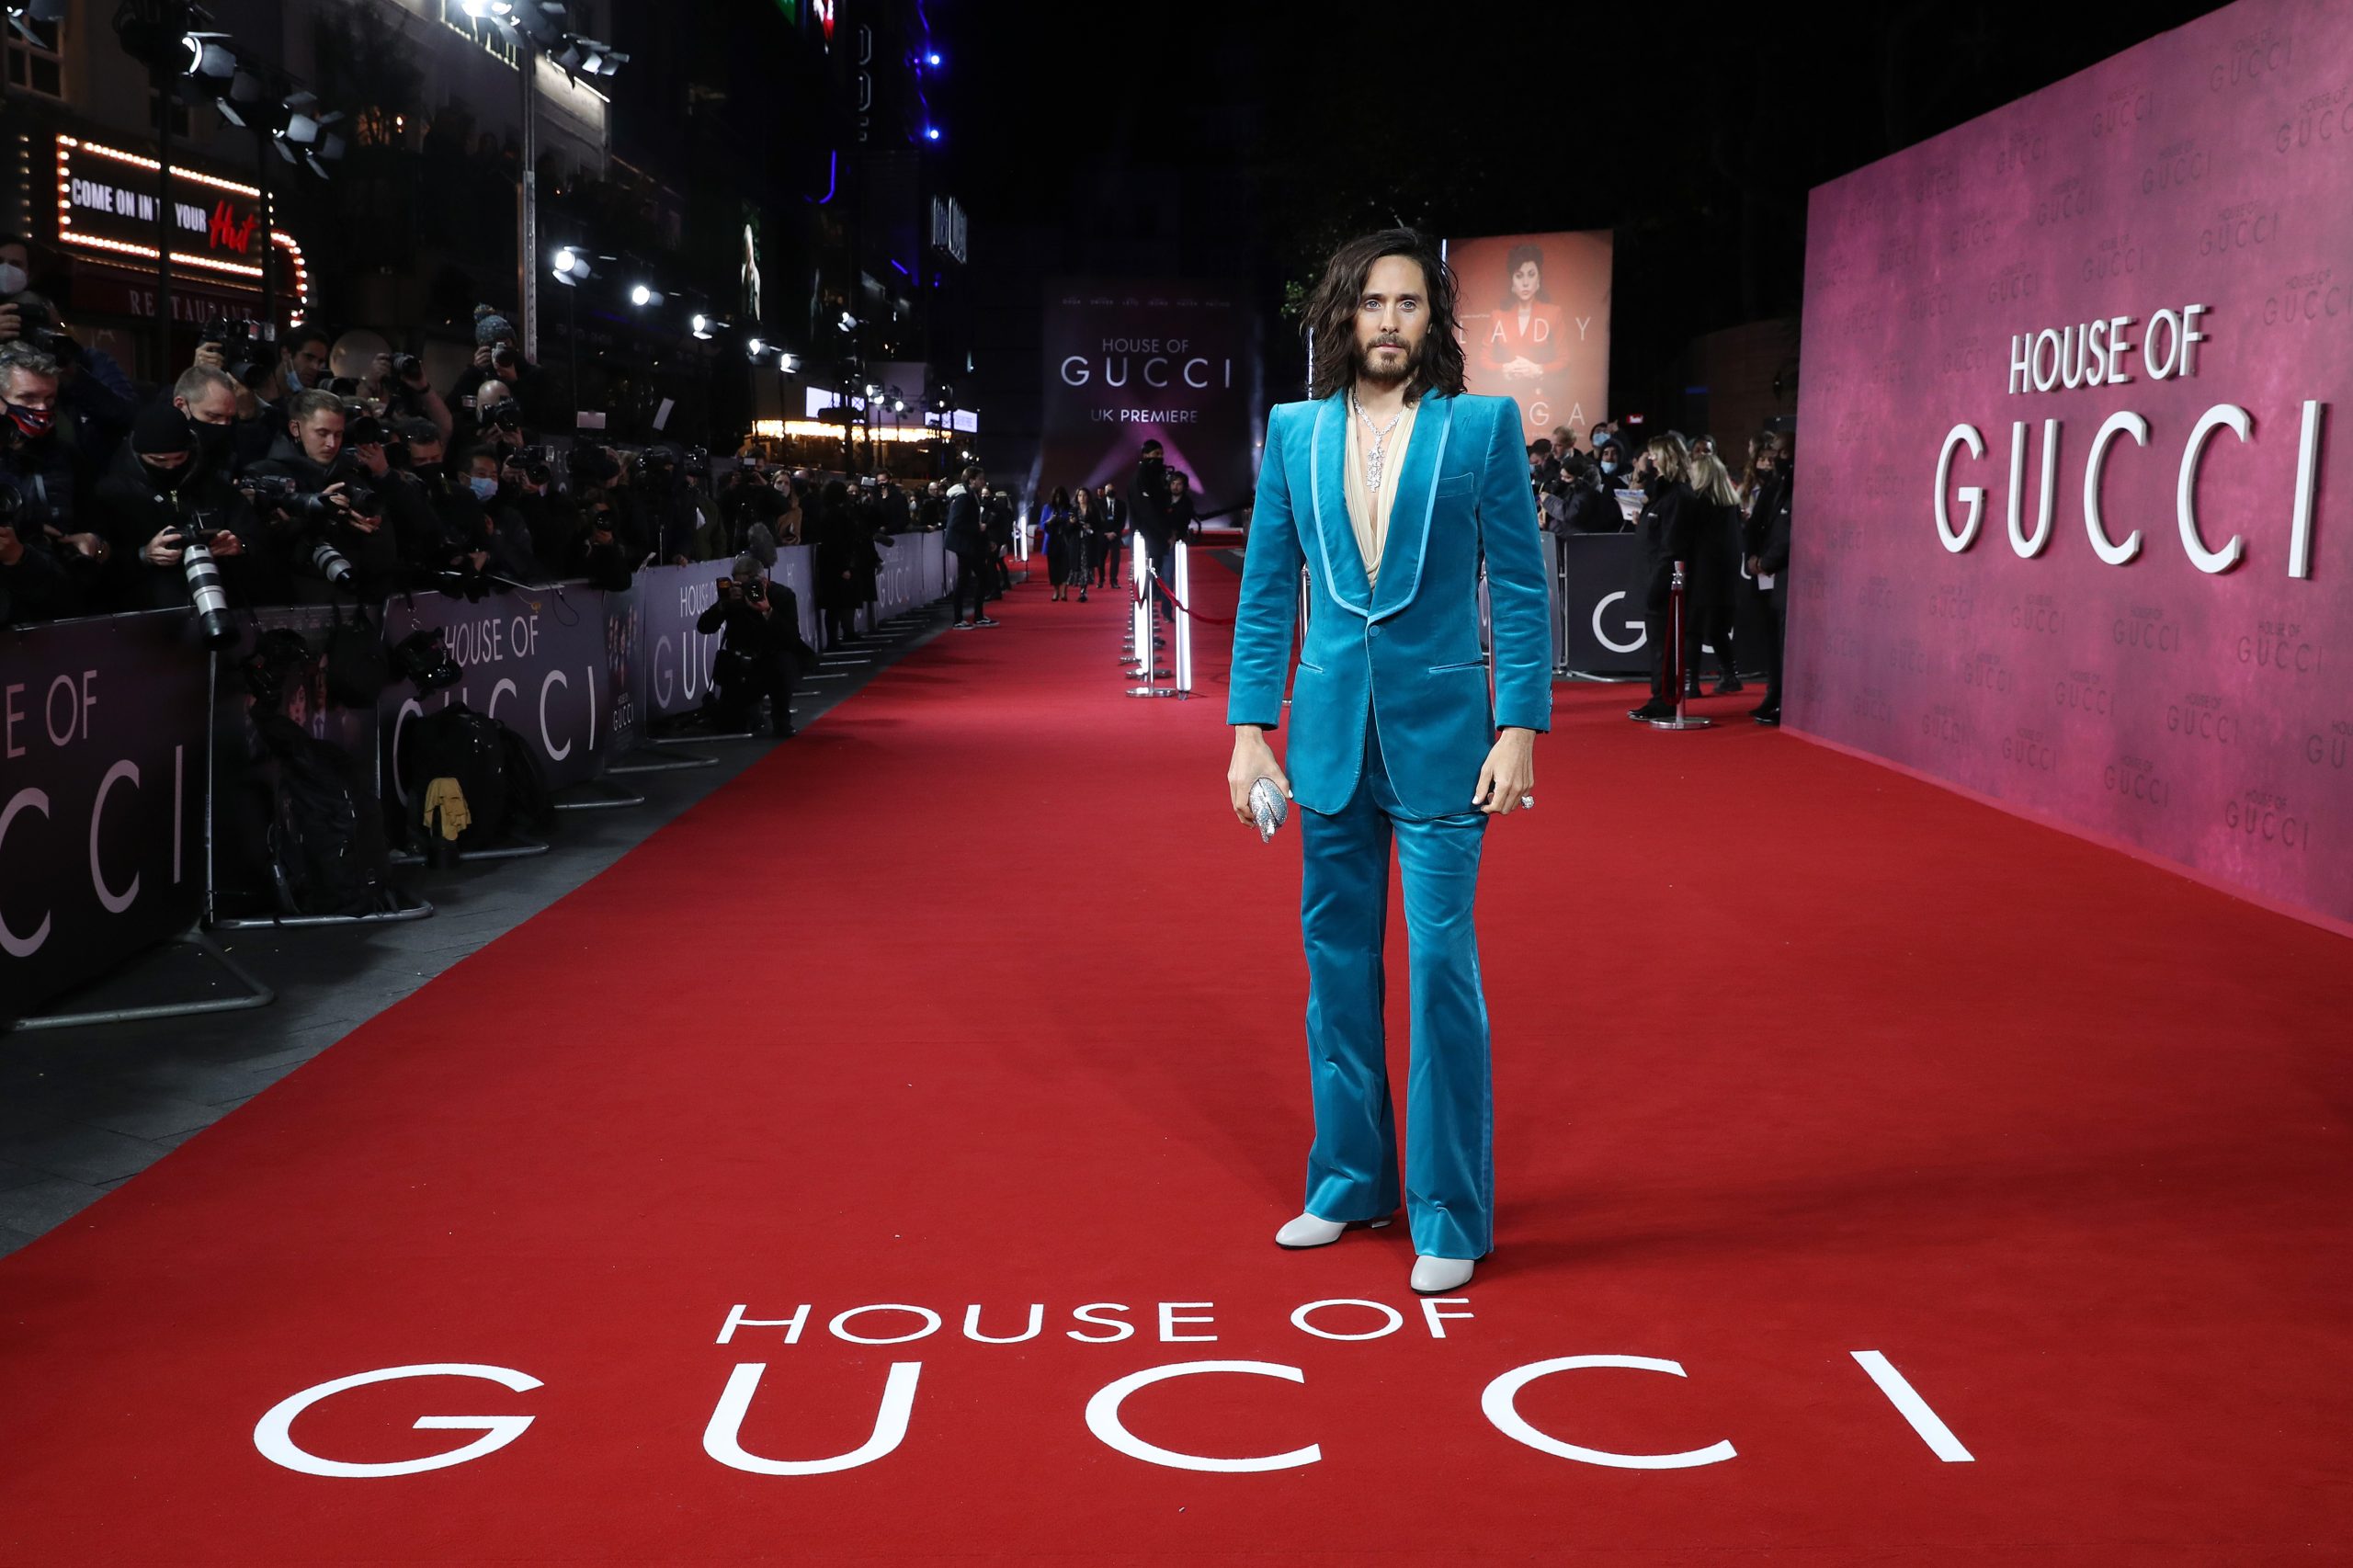 LONDON, ENGLAND - NOVEMBER 09: Jared Leto attends the UK Premiere Of "House of Gucci" at Odeon Luxe Leicester Square on November 09, 2021 in London, England. (Photo by Tristan Fewings/Getty Images for Metro-Goldwyn-Mayer Studios and Universal Pictures )